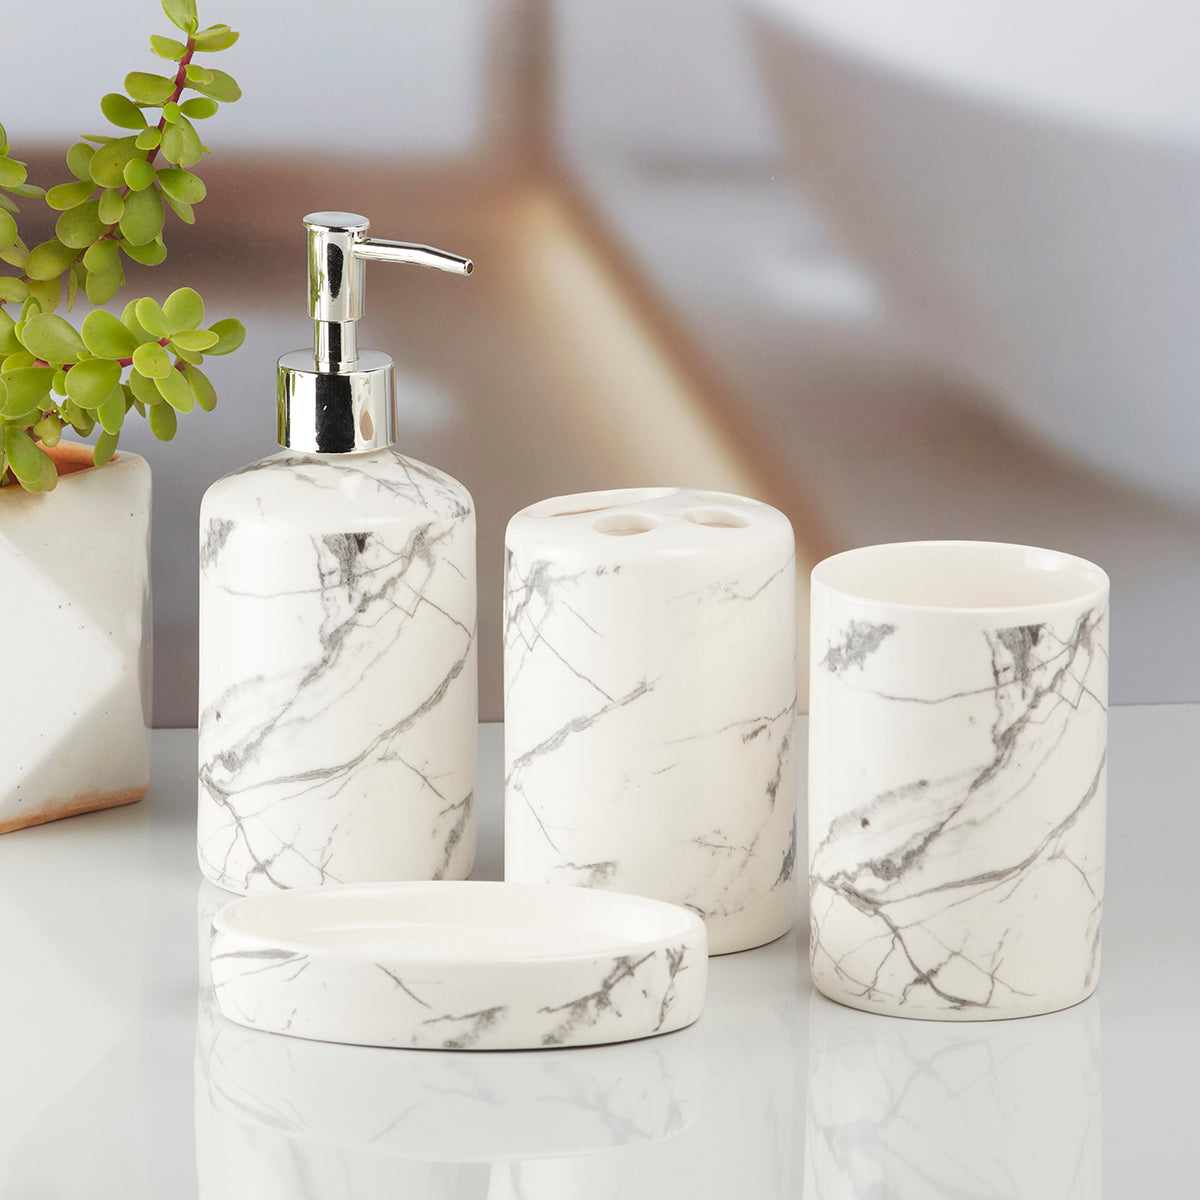 Kookee Ceramic Bathroom Accessories Set of 4, Modern Bath Set with Liquid handwash Soap Dispenser and Toothbrush holder, Luxury Gift Accessory for Home, White/Grey (8074)